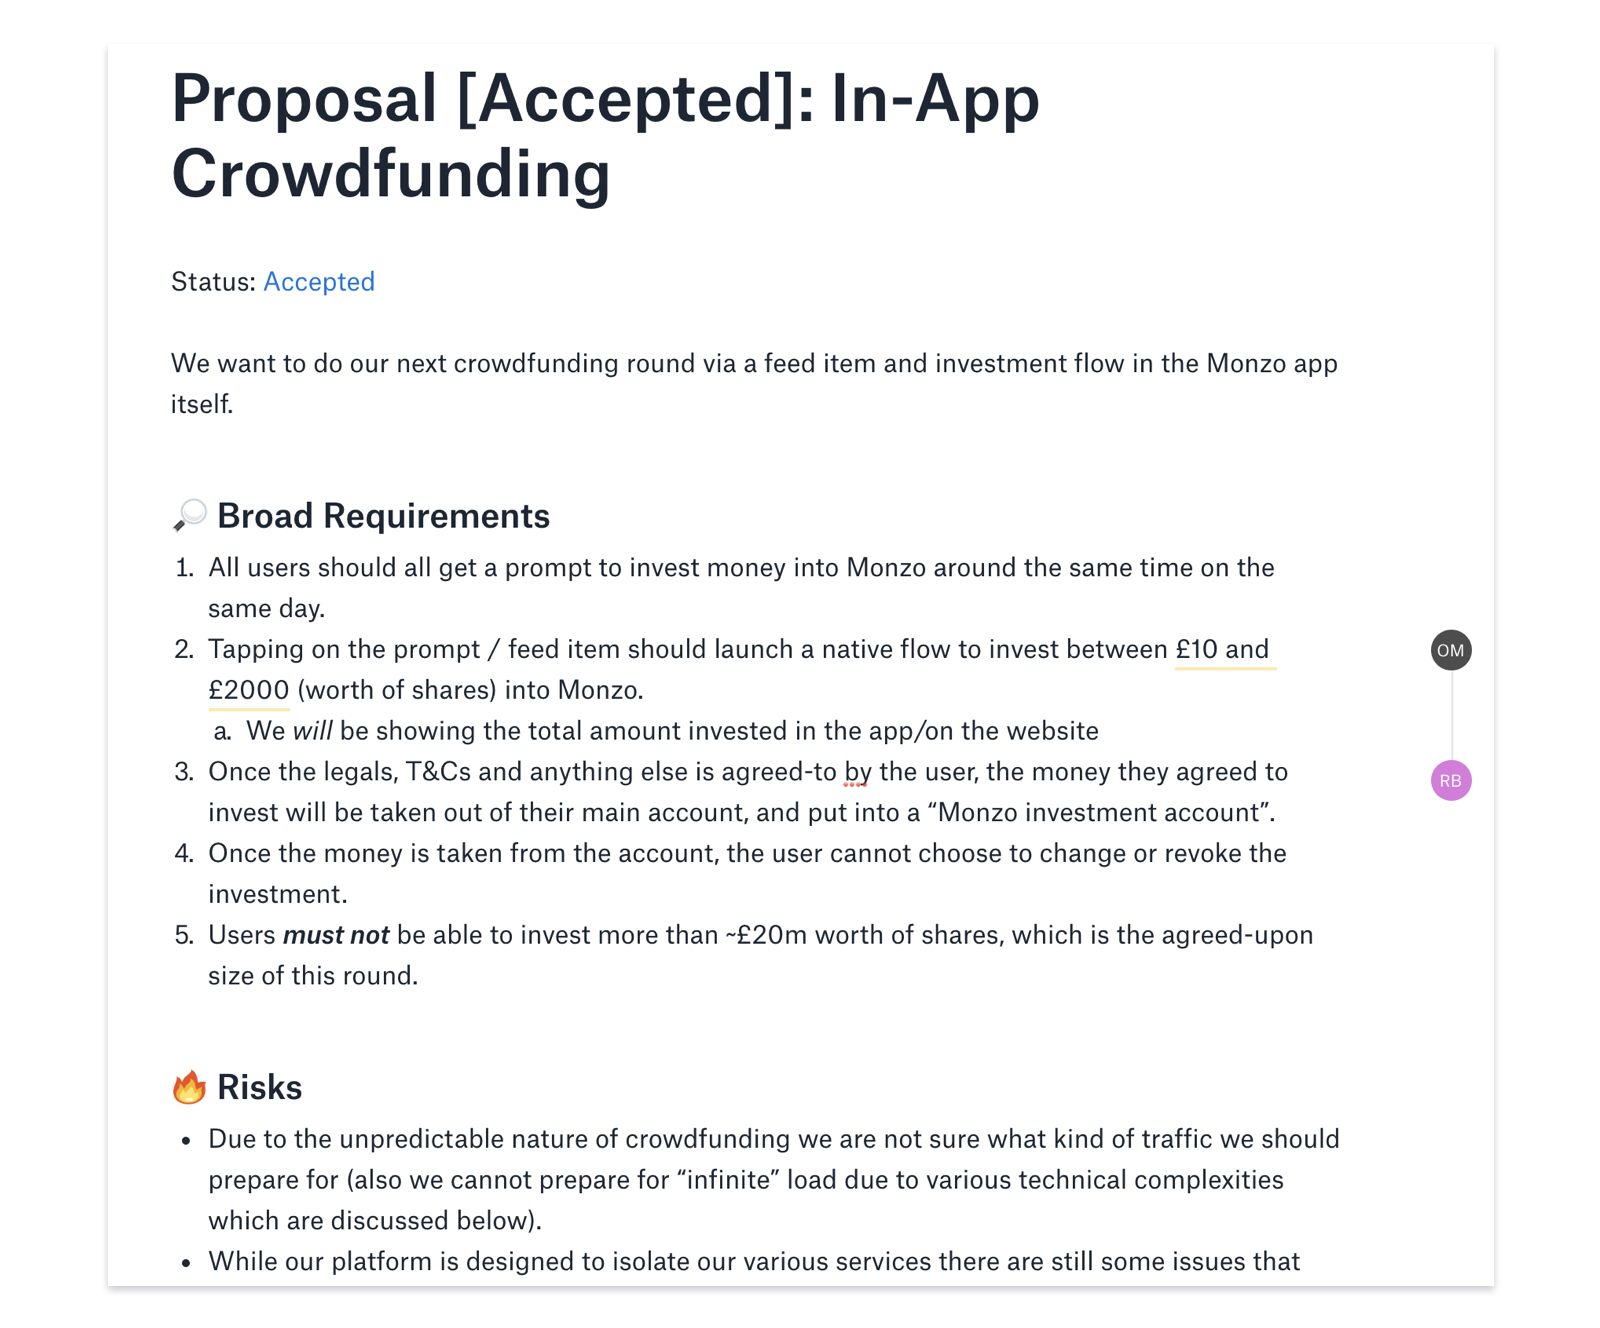 Proposal document for building crowdfunding in-app